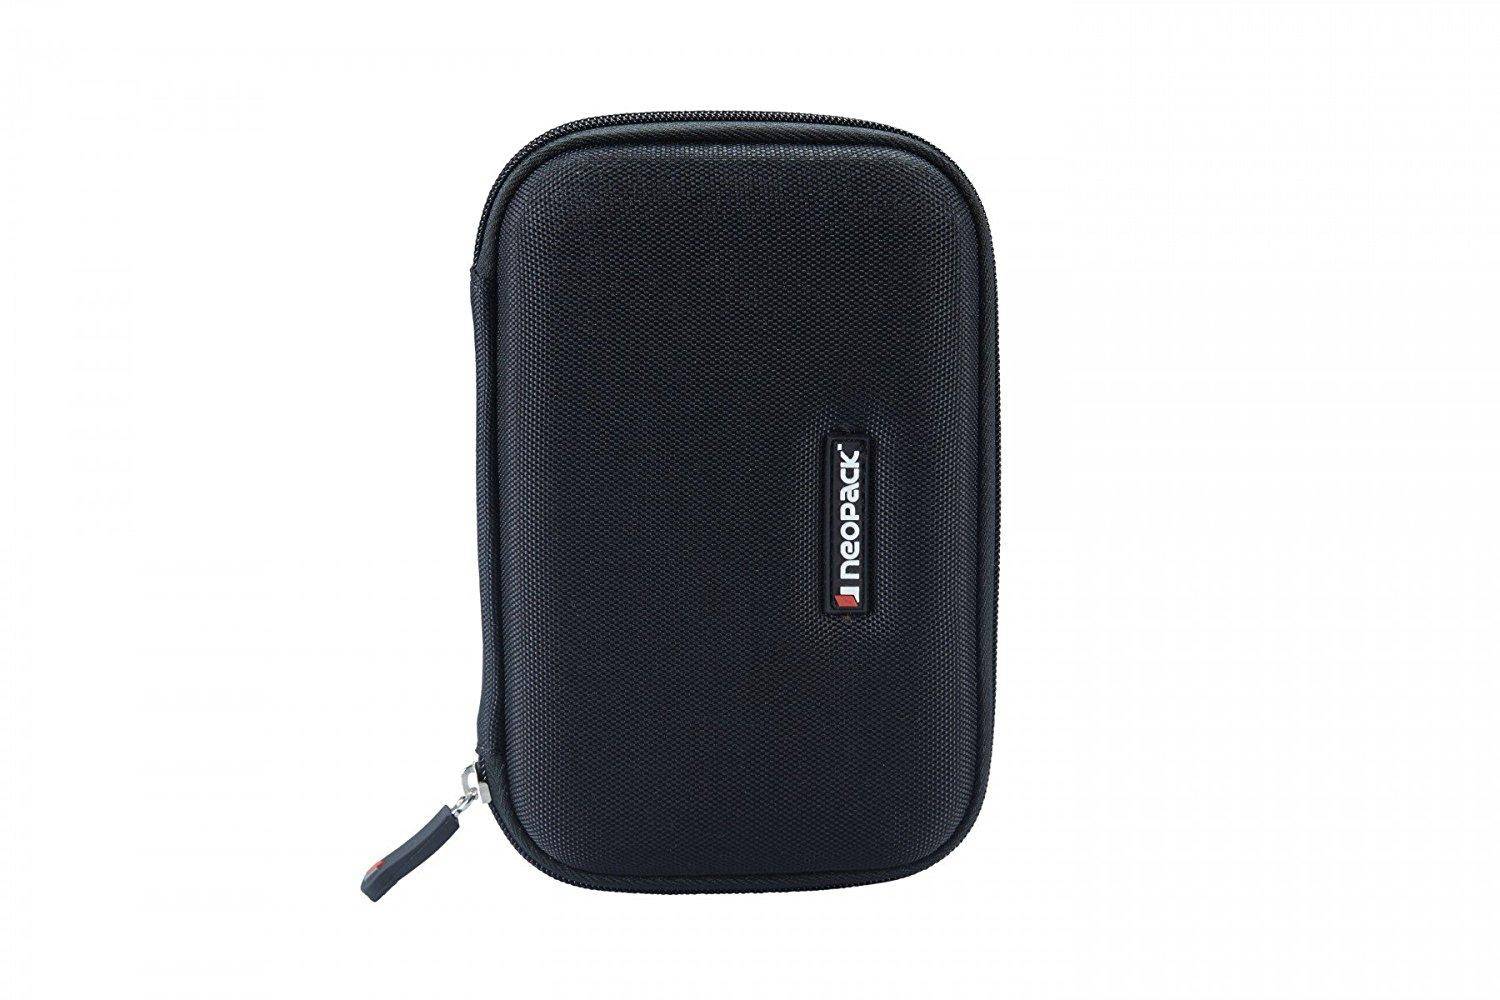 Neopack Ultra Slim HDD Case 2.5 inch Portable Hard Disk zoom image